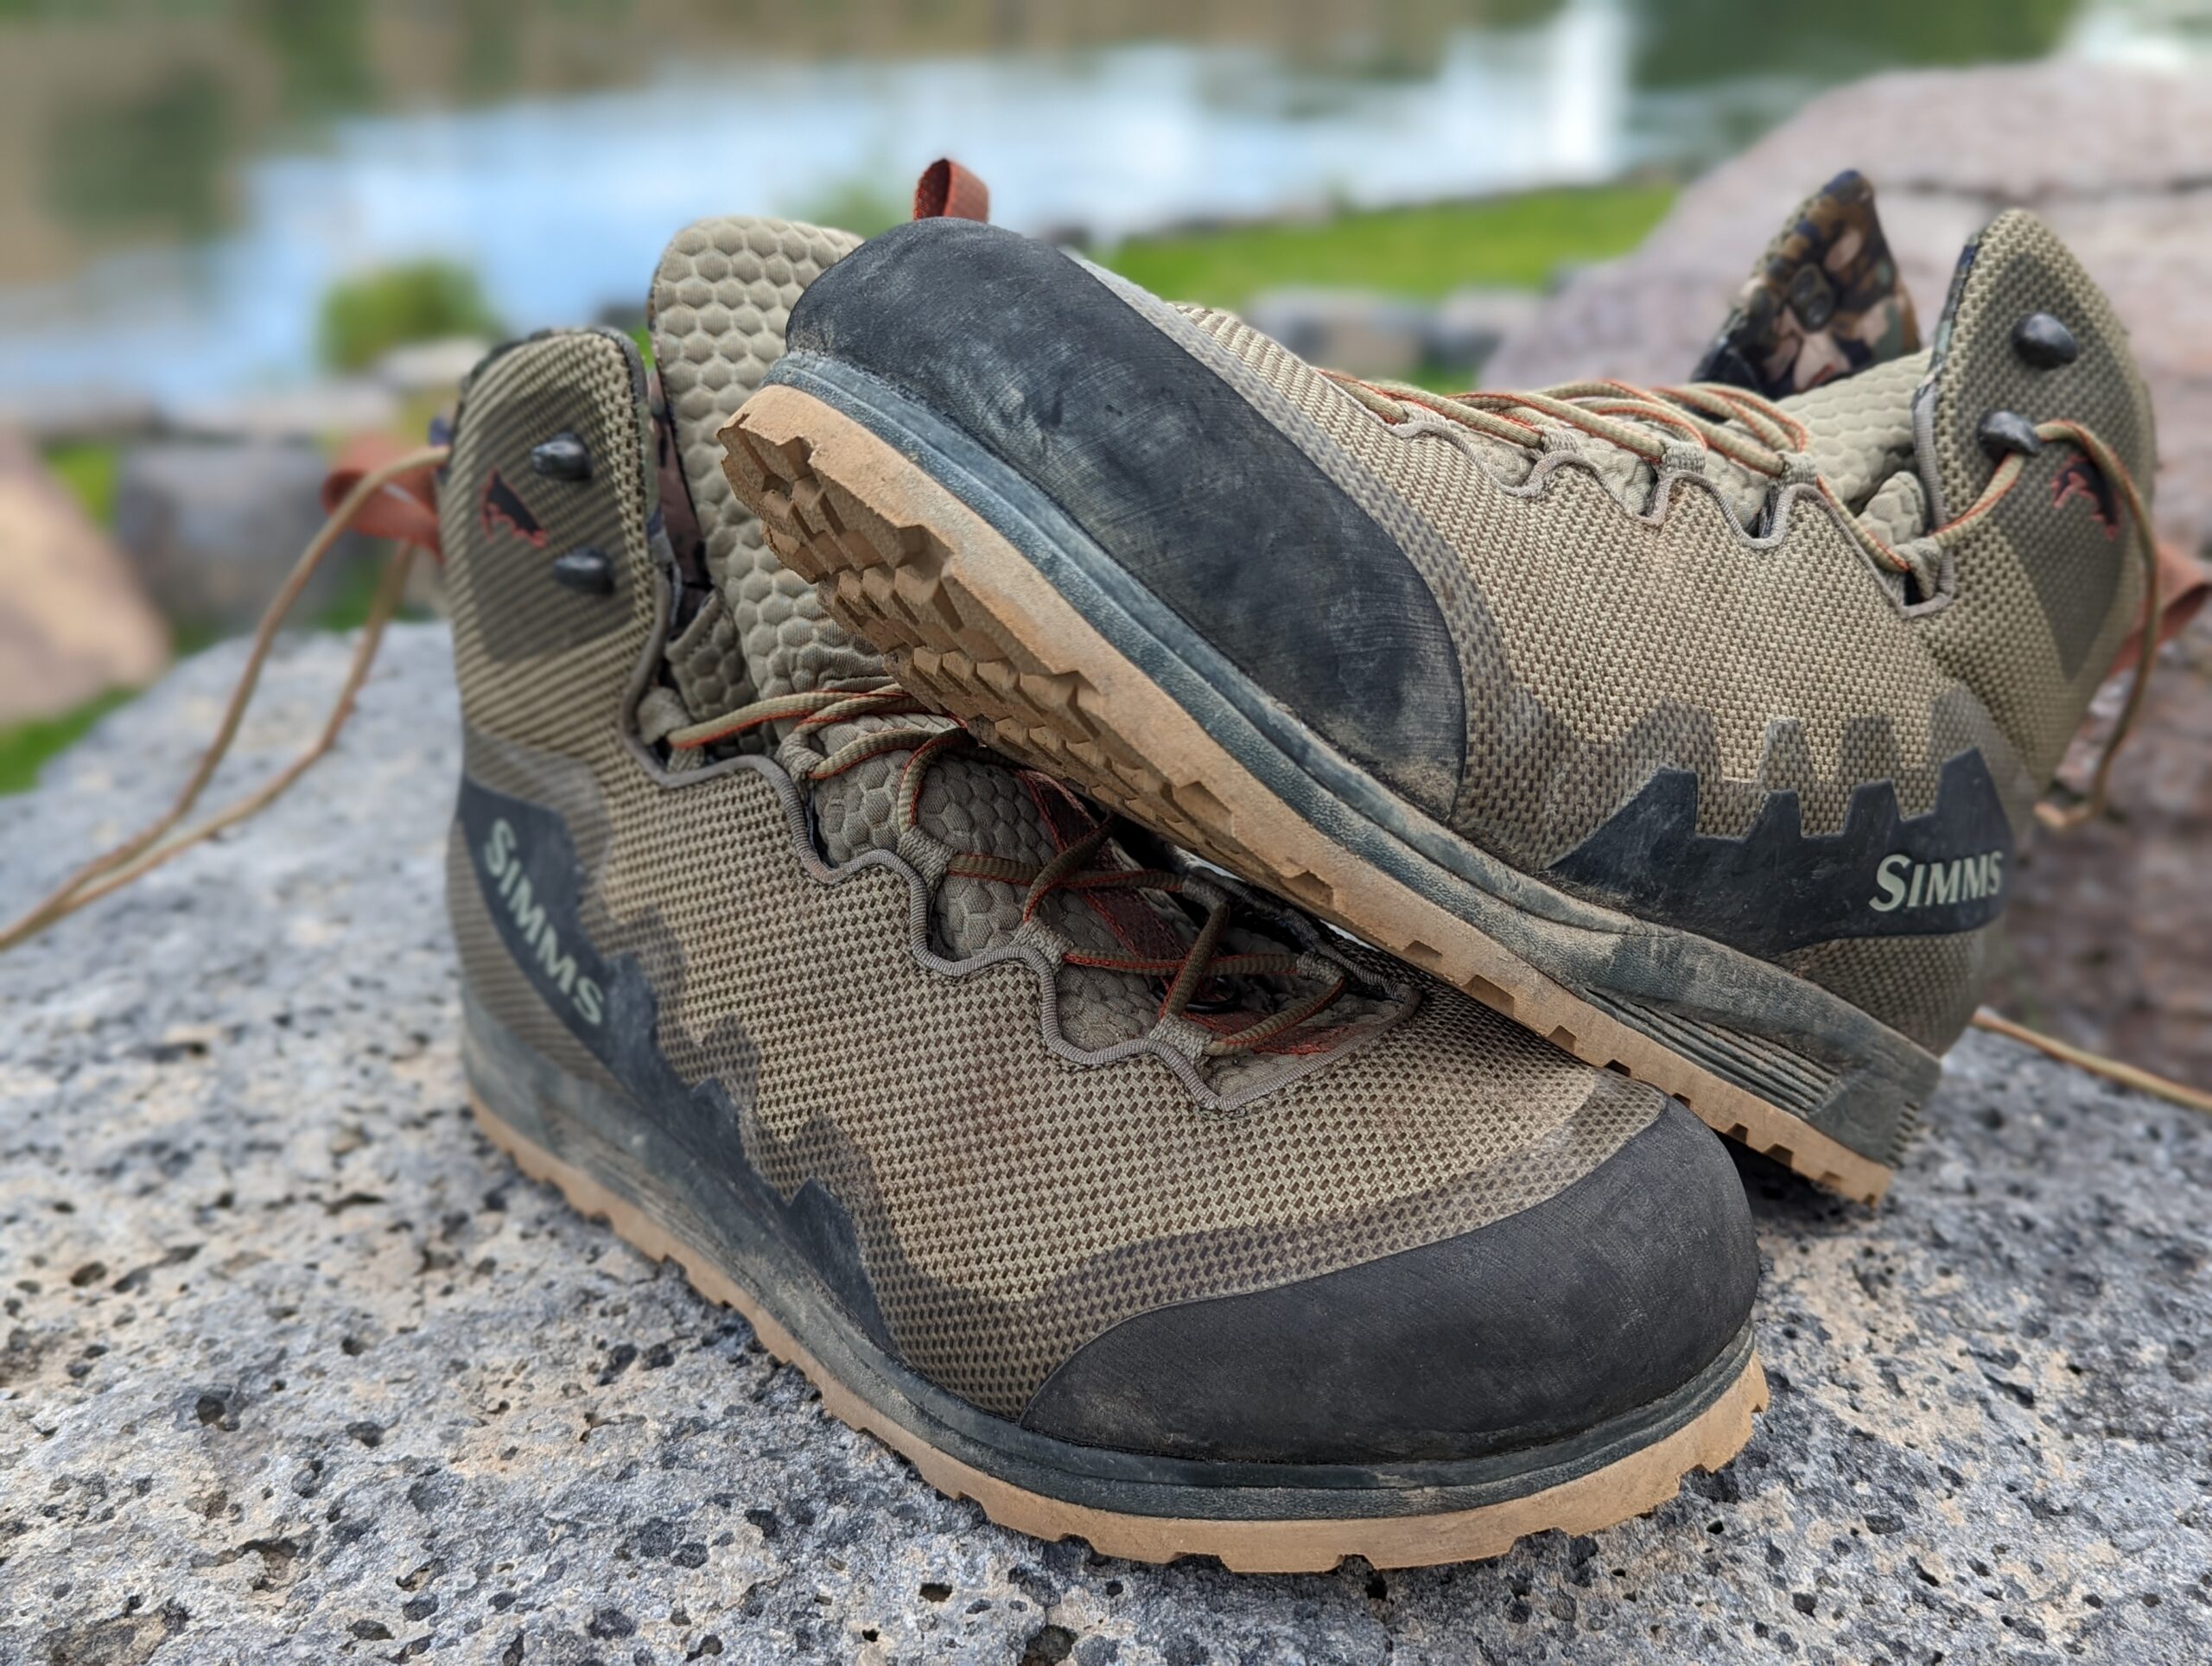 Lightweight access is like hiking boots used for wading